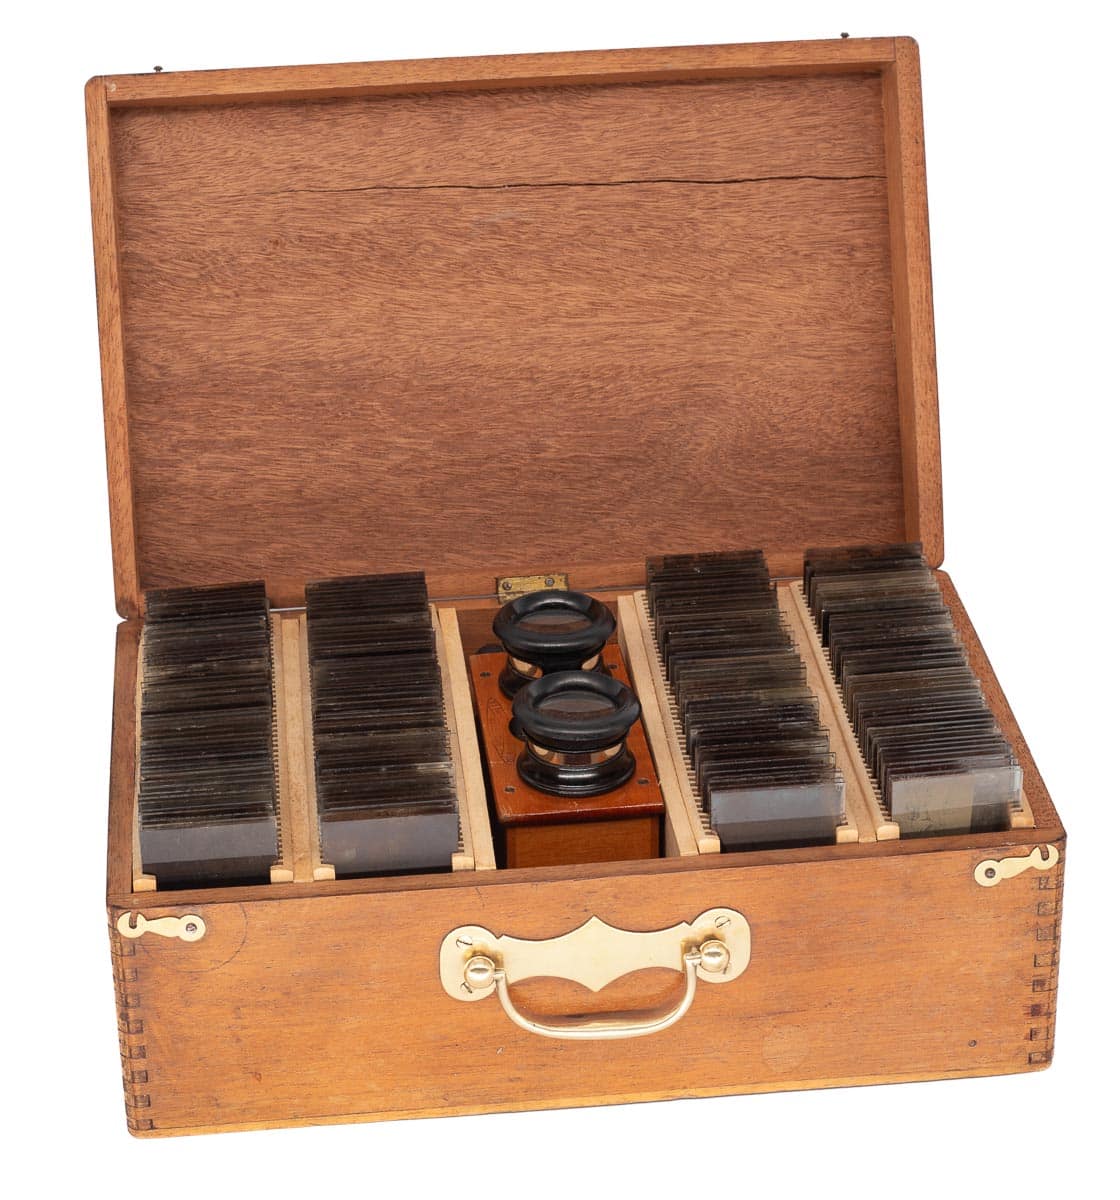 Wooden case with 100 stereoviews and a 45 x 107 mm stereoscope.